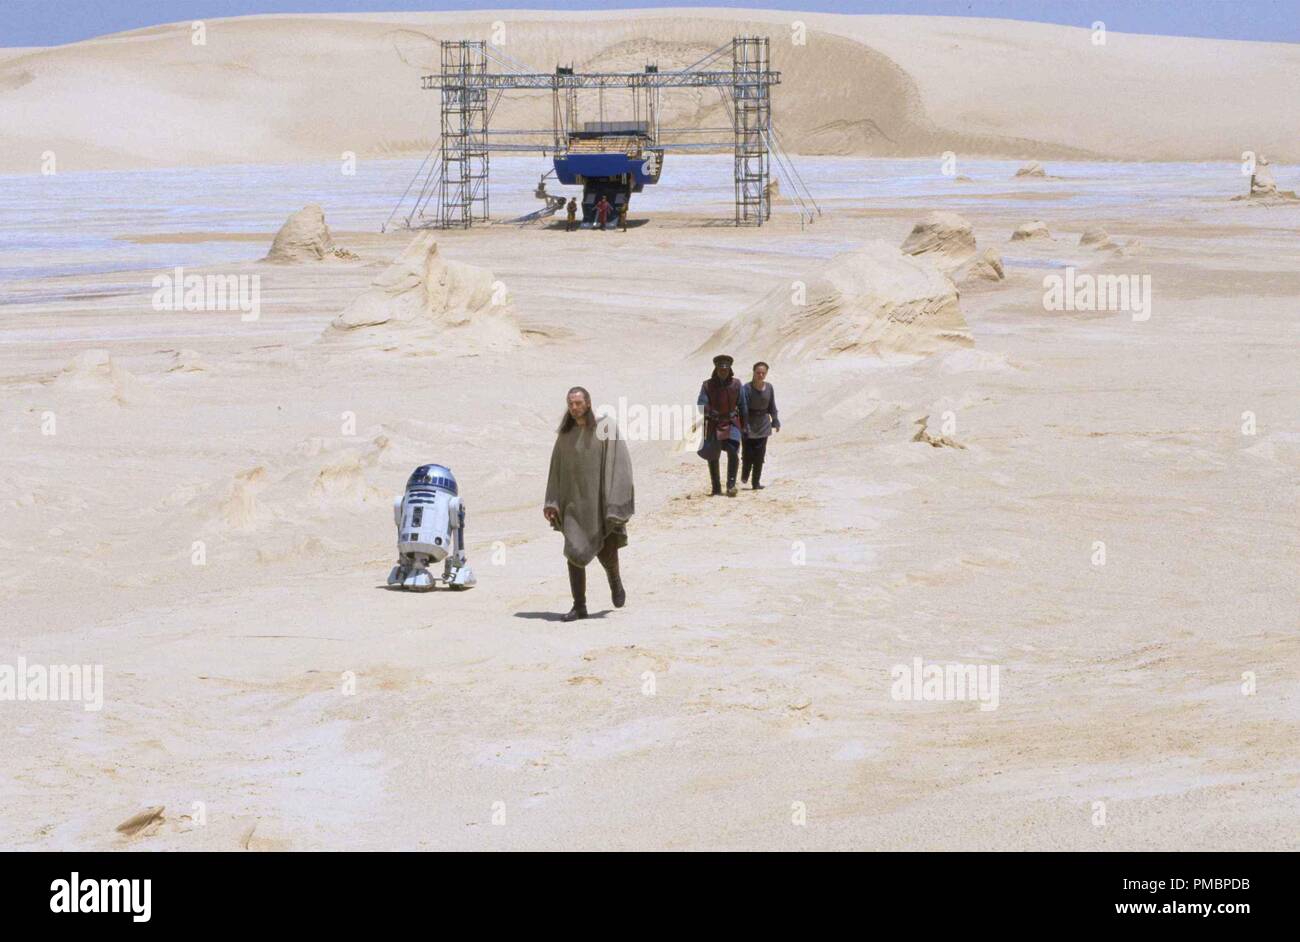 Liam Neeson filming the Tatooine trek sequence in Tunisia in 'Star Wars Episode I: The Phantom Menace' (1999)  File Reference # 32603 436THA Stock Photo